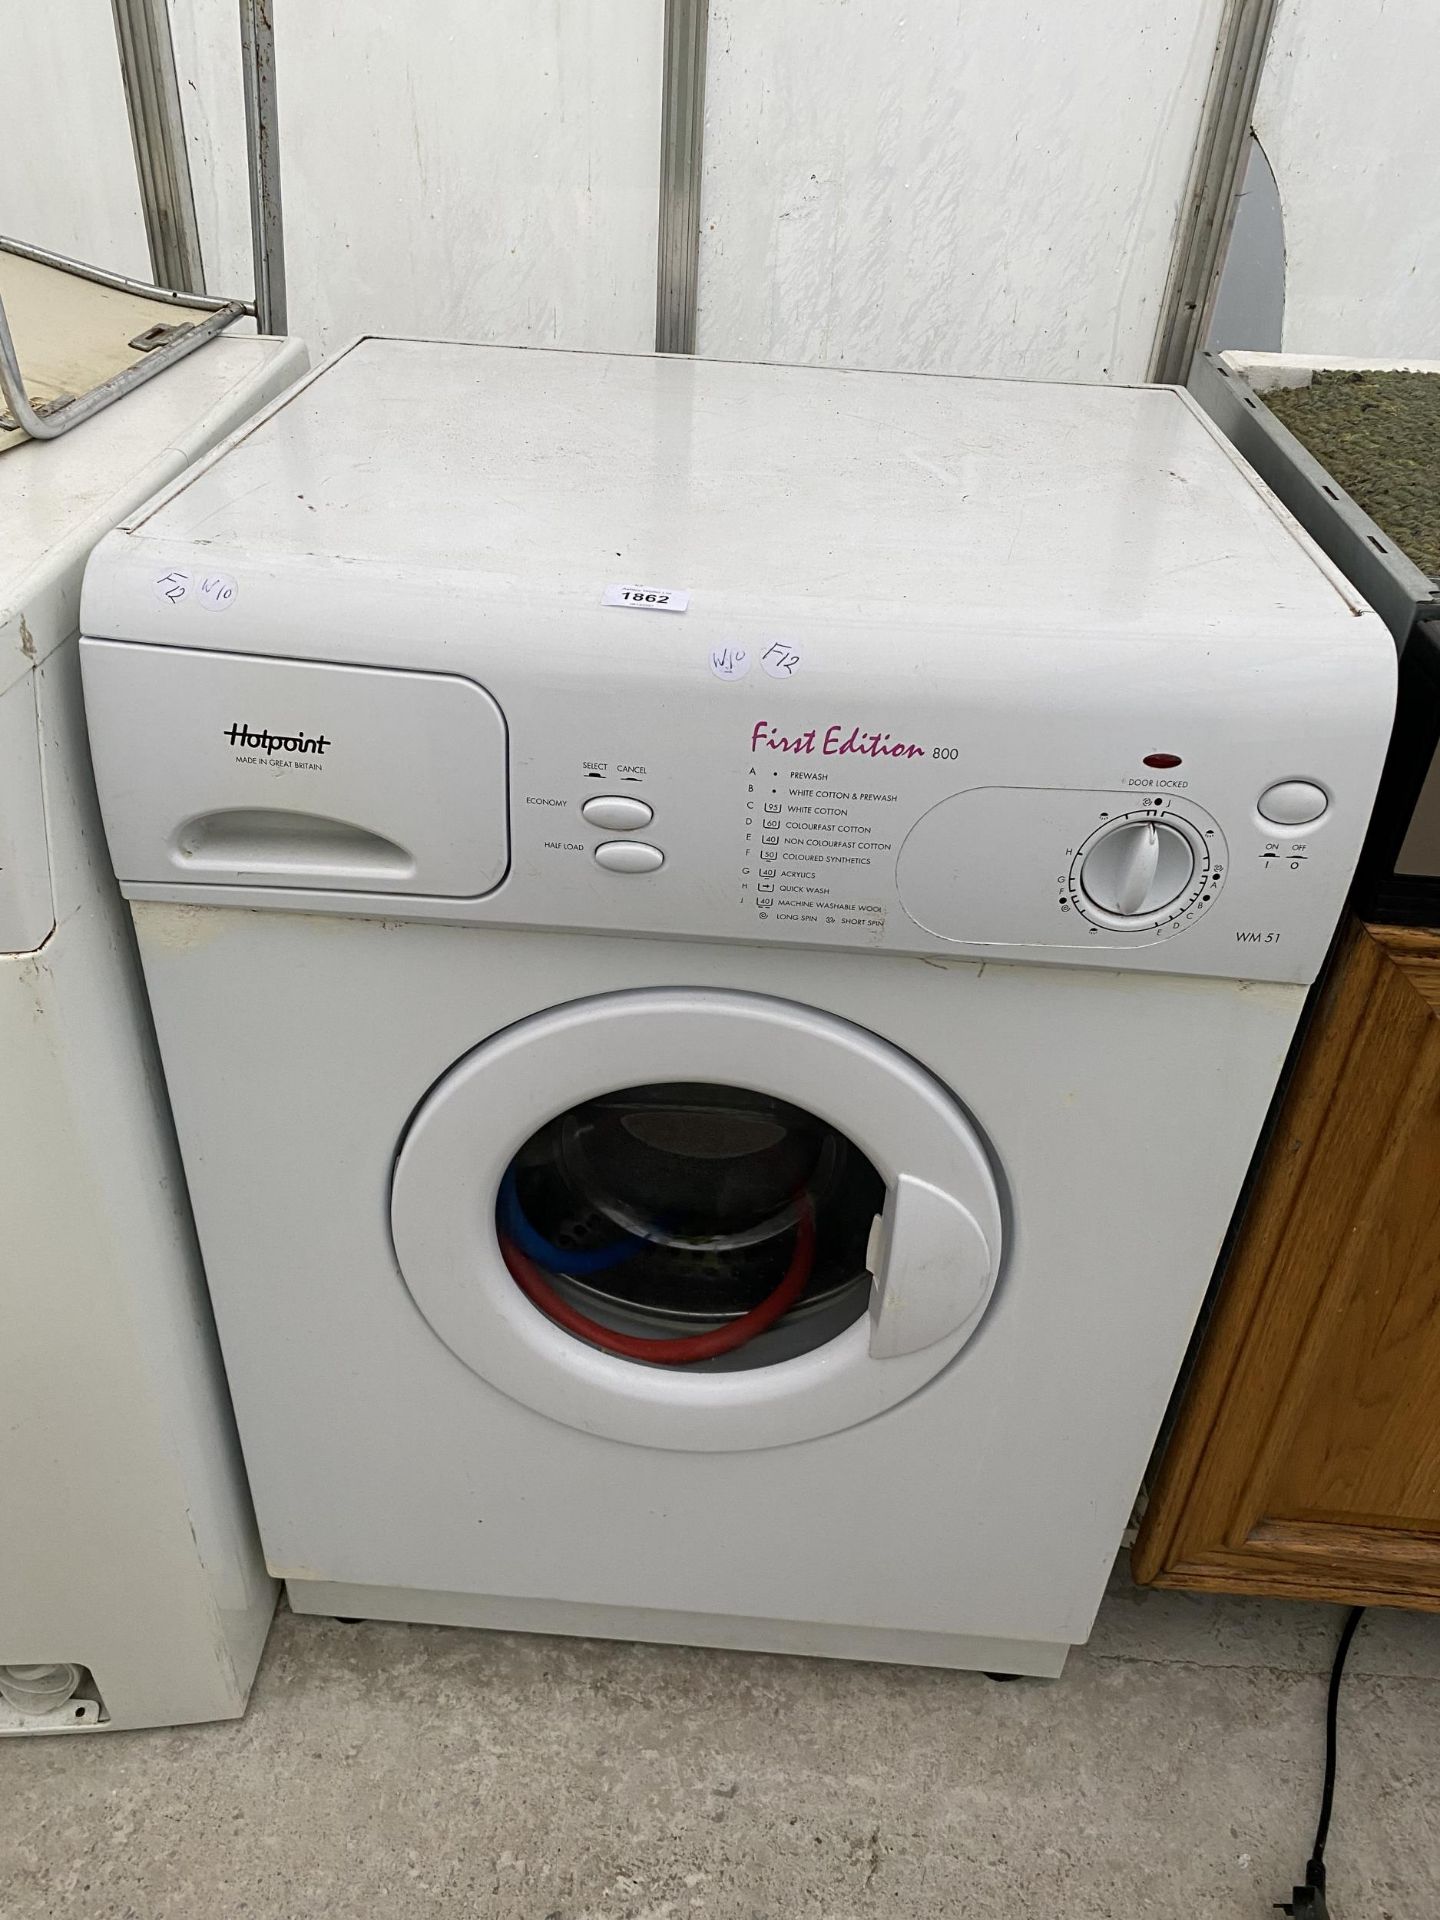 A WHITE HOTPOINT WASHING MACHINE (BELIEVED TO BE IN WORKING ORDER BUT NO GUARENTEE)